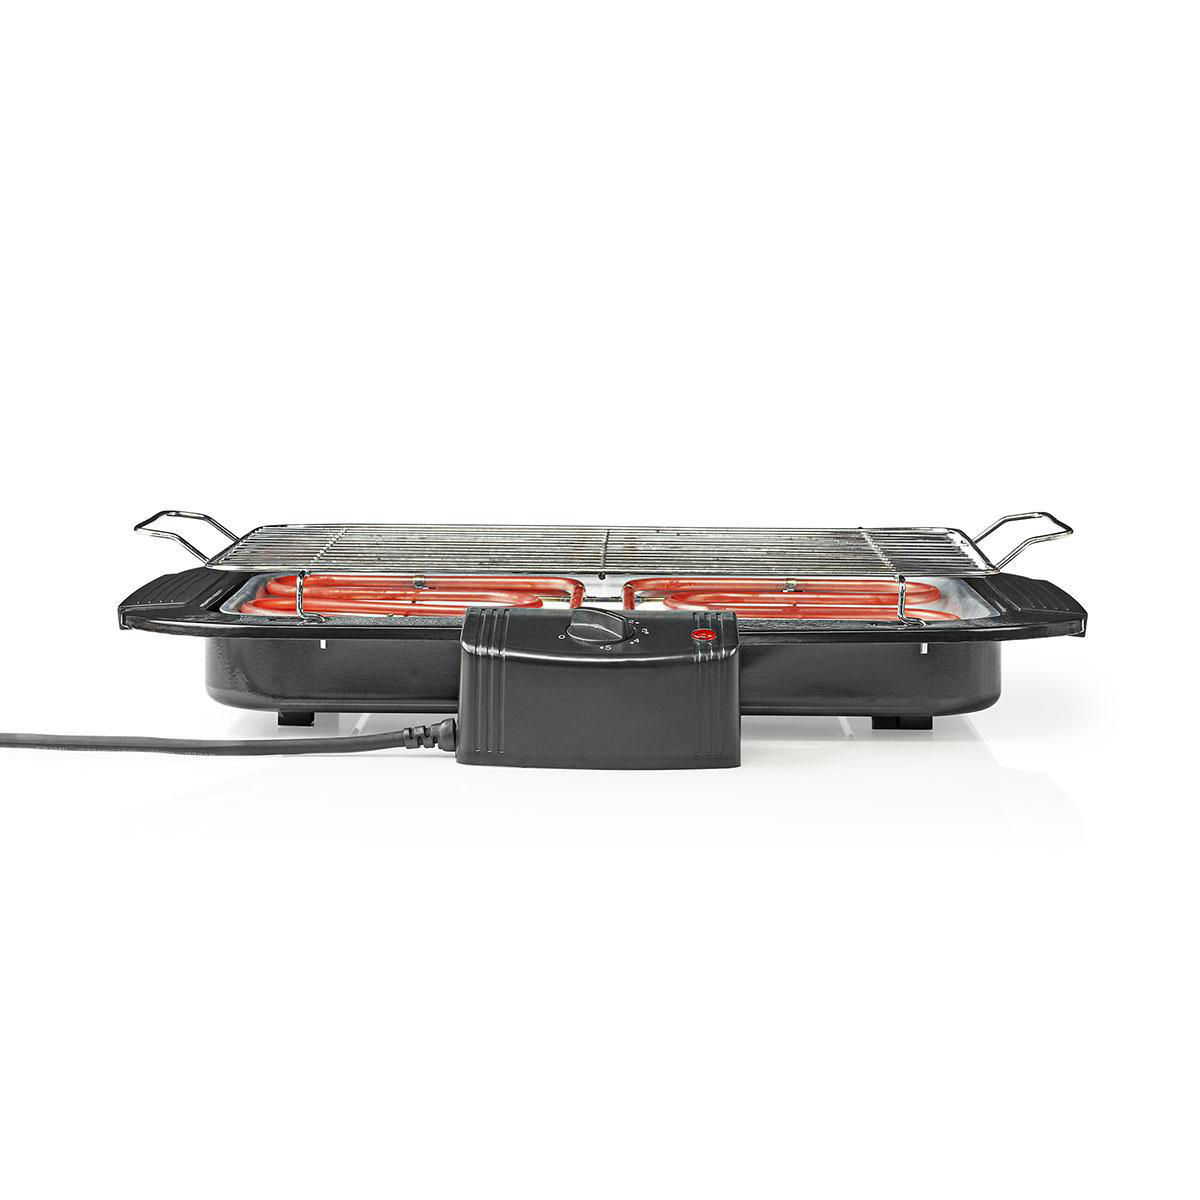 MD MG-5502 Electrical Barbecue 